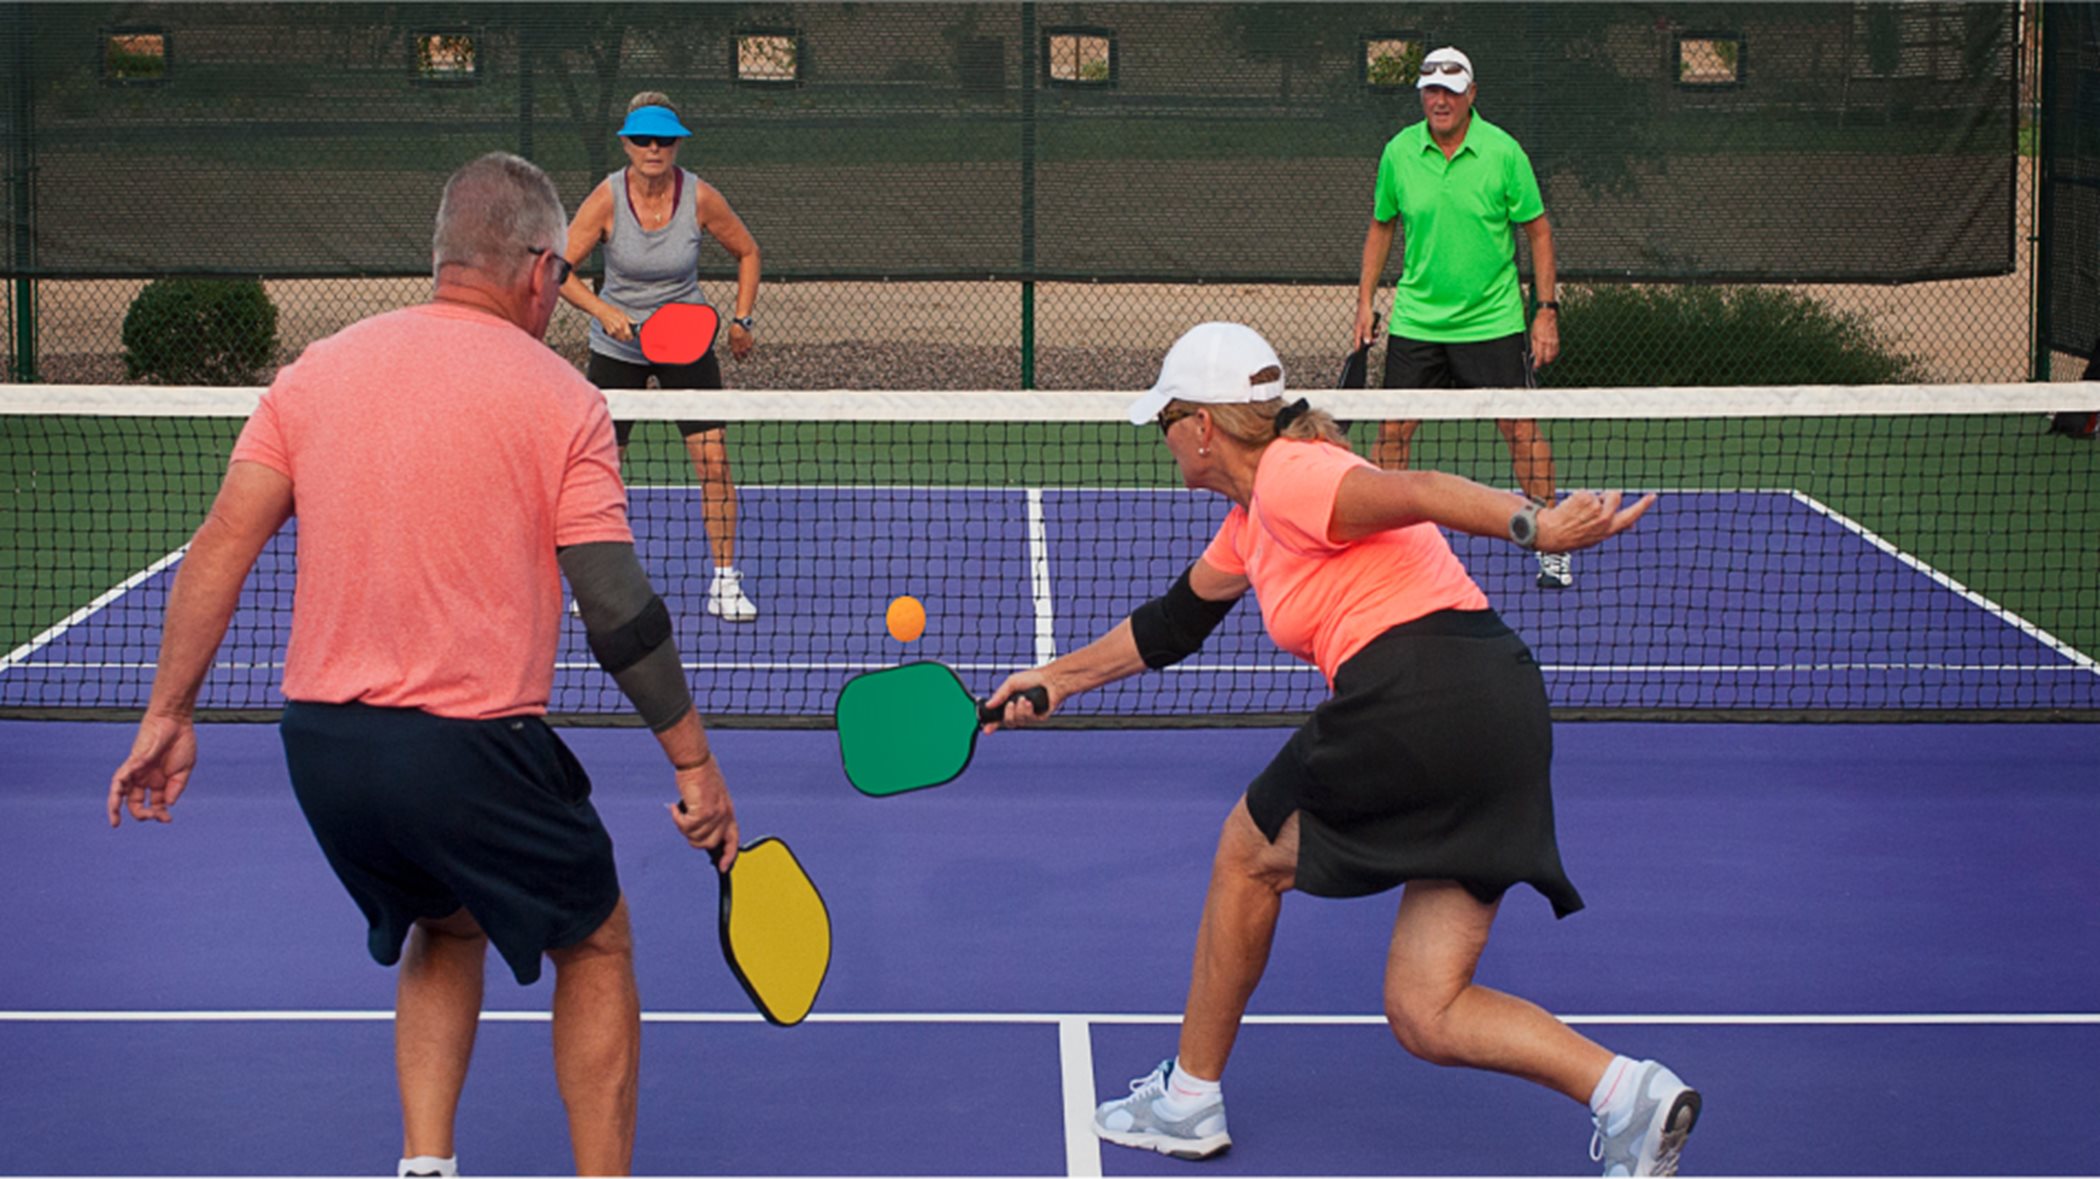 Friends playing pickleball